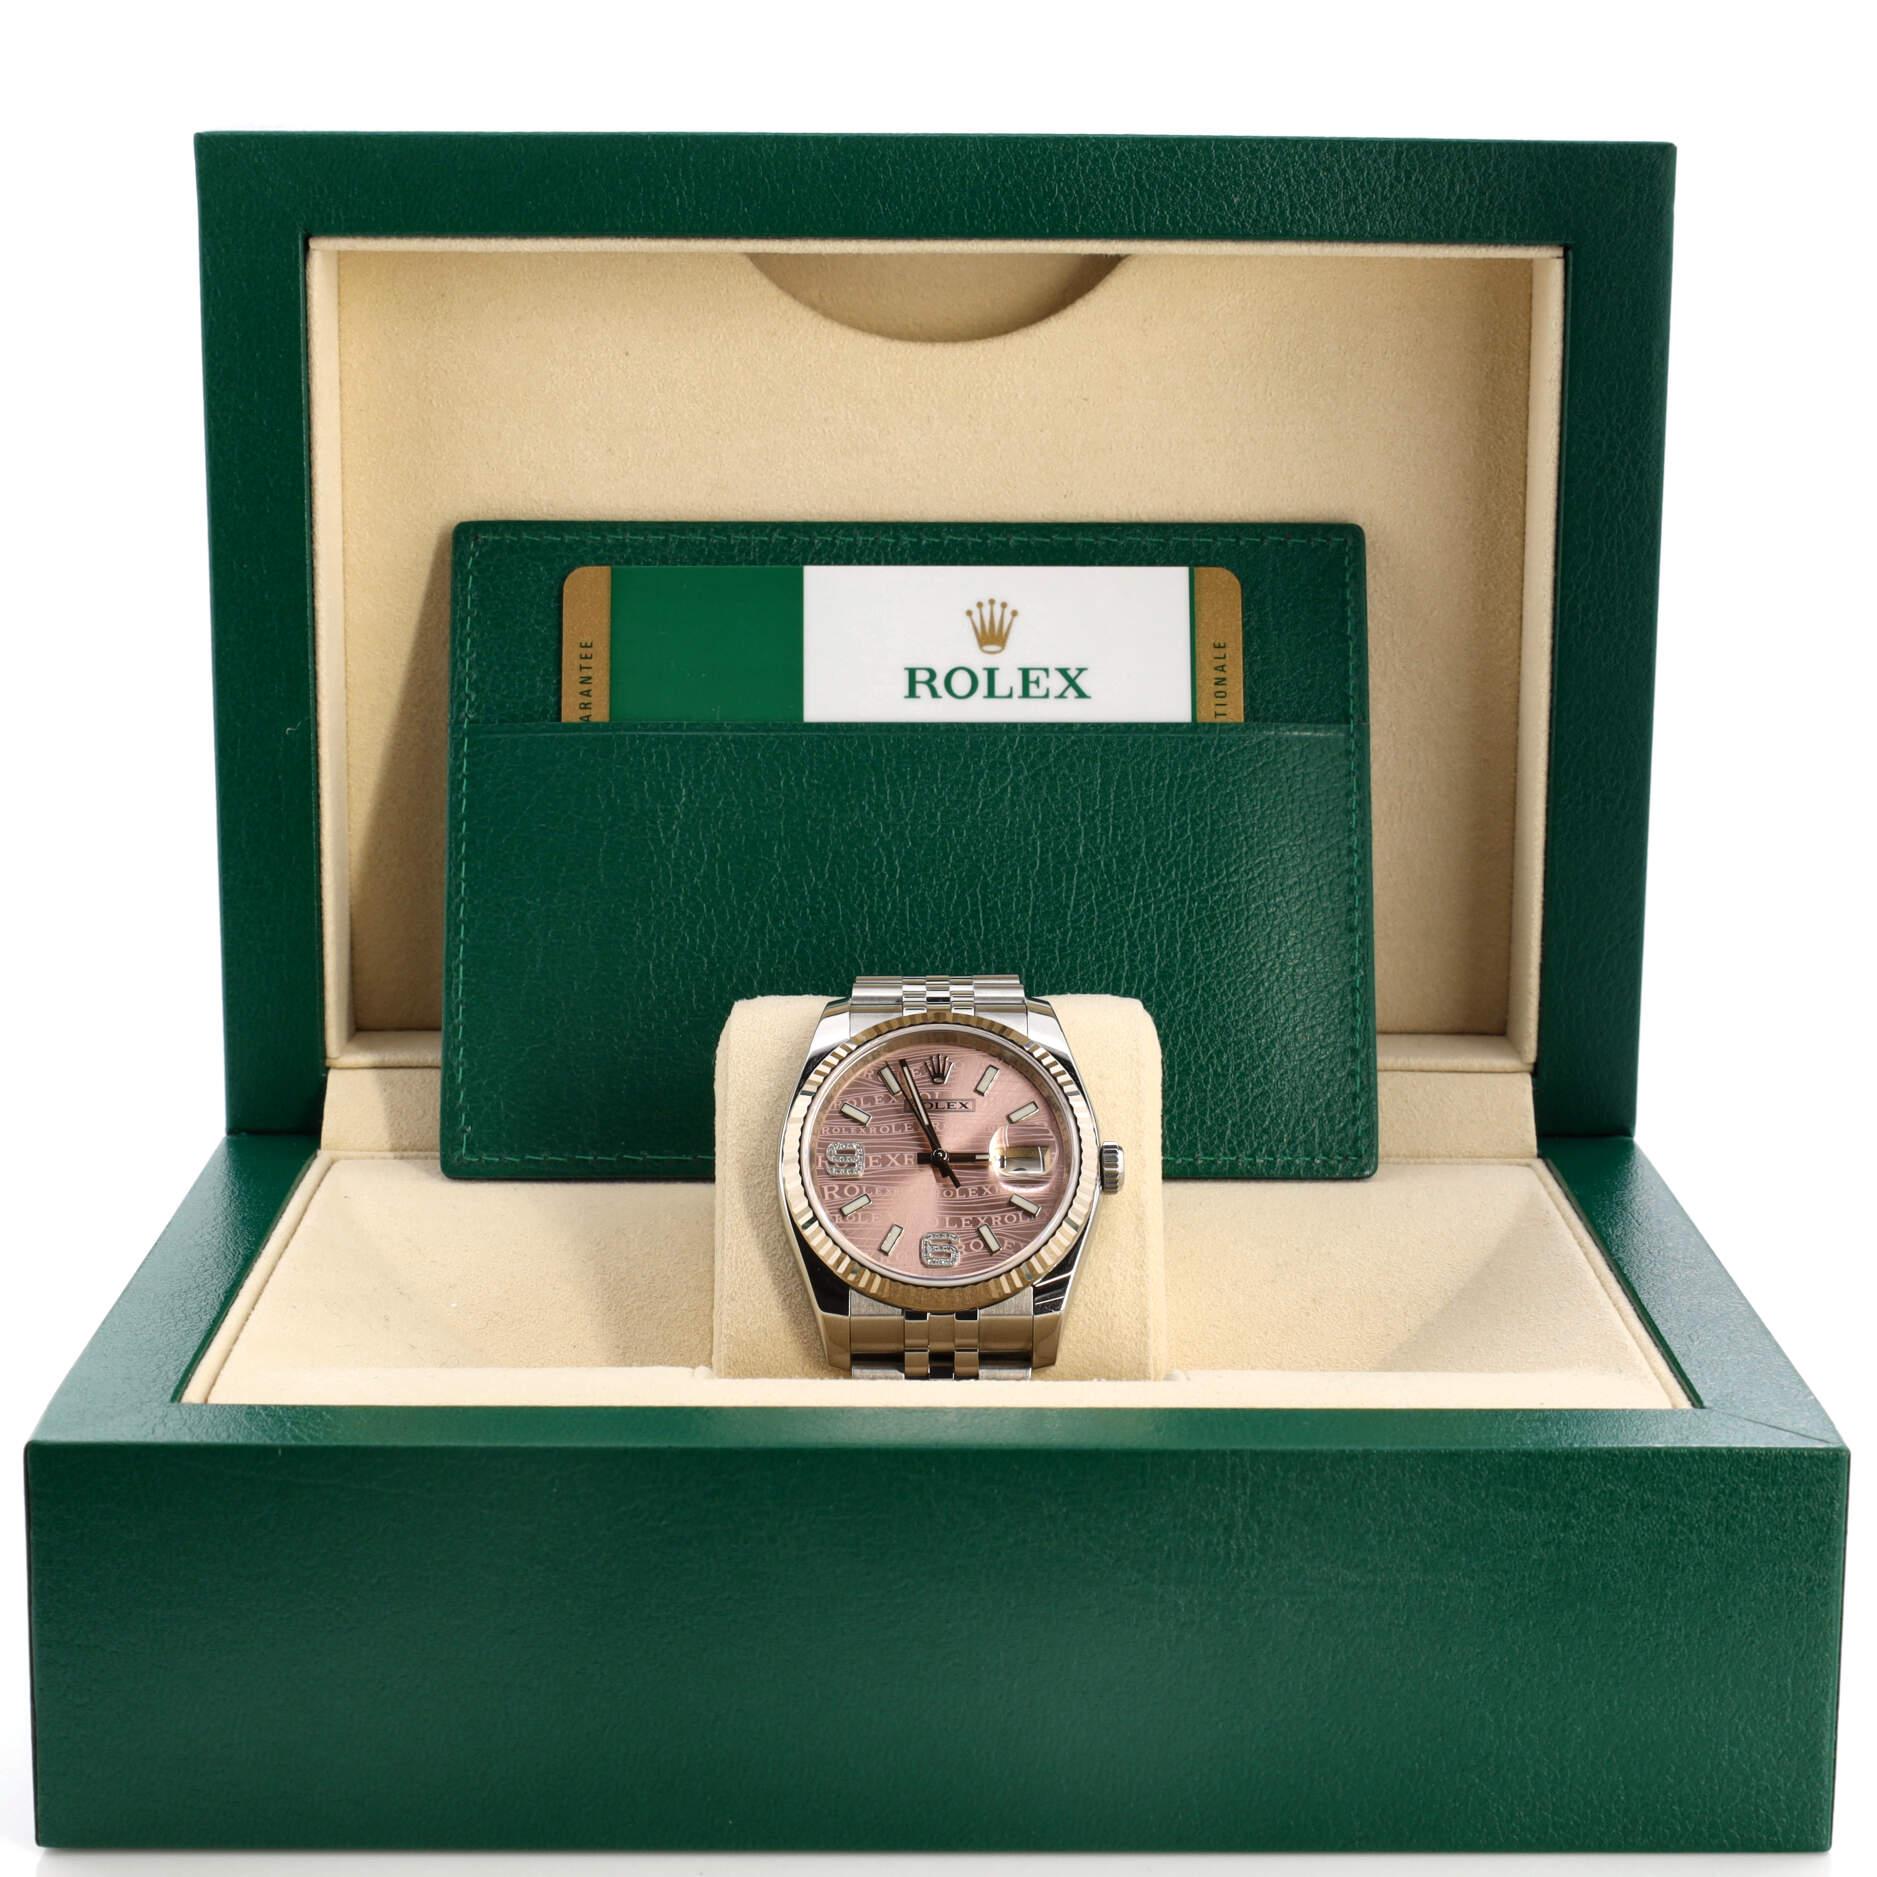 Condition: Great. Minor wear throughout case and bracelet.
Accessories: Warranty Card - Dated, Instruction Booklet, Box
Measurements: Case Size/Width: 36mm, Watch Height: 12mm, Band Width: 20mm, Wrist circumference: 4.75